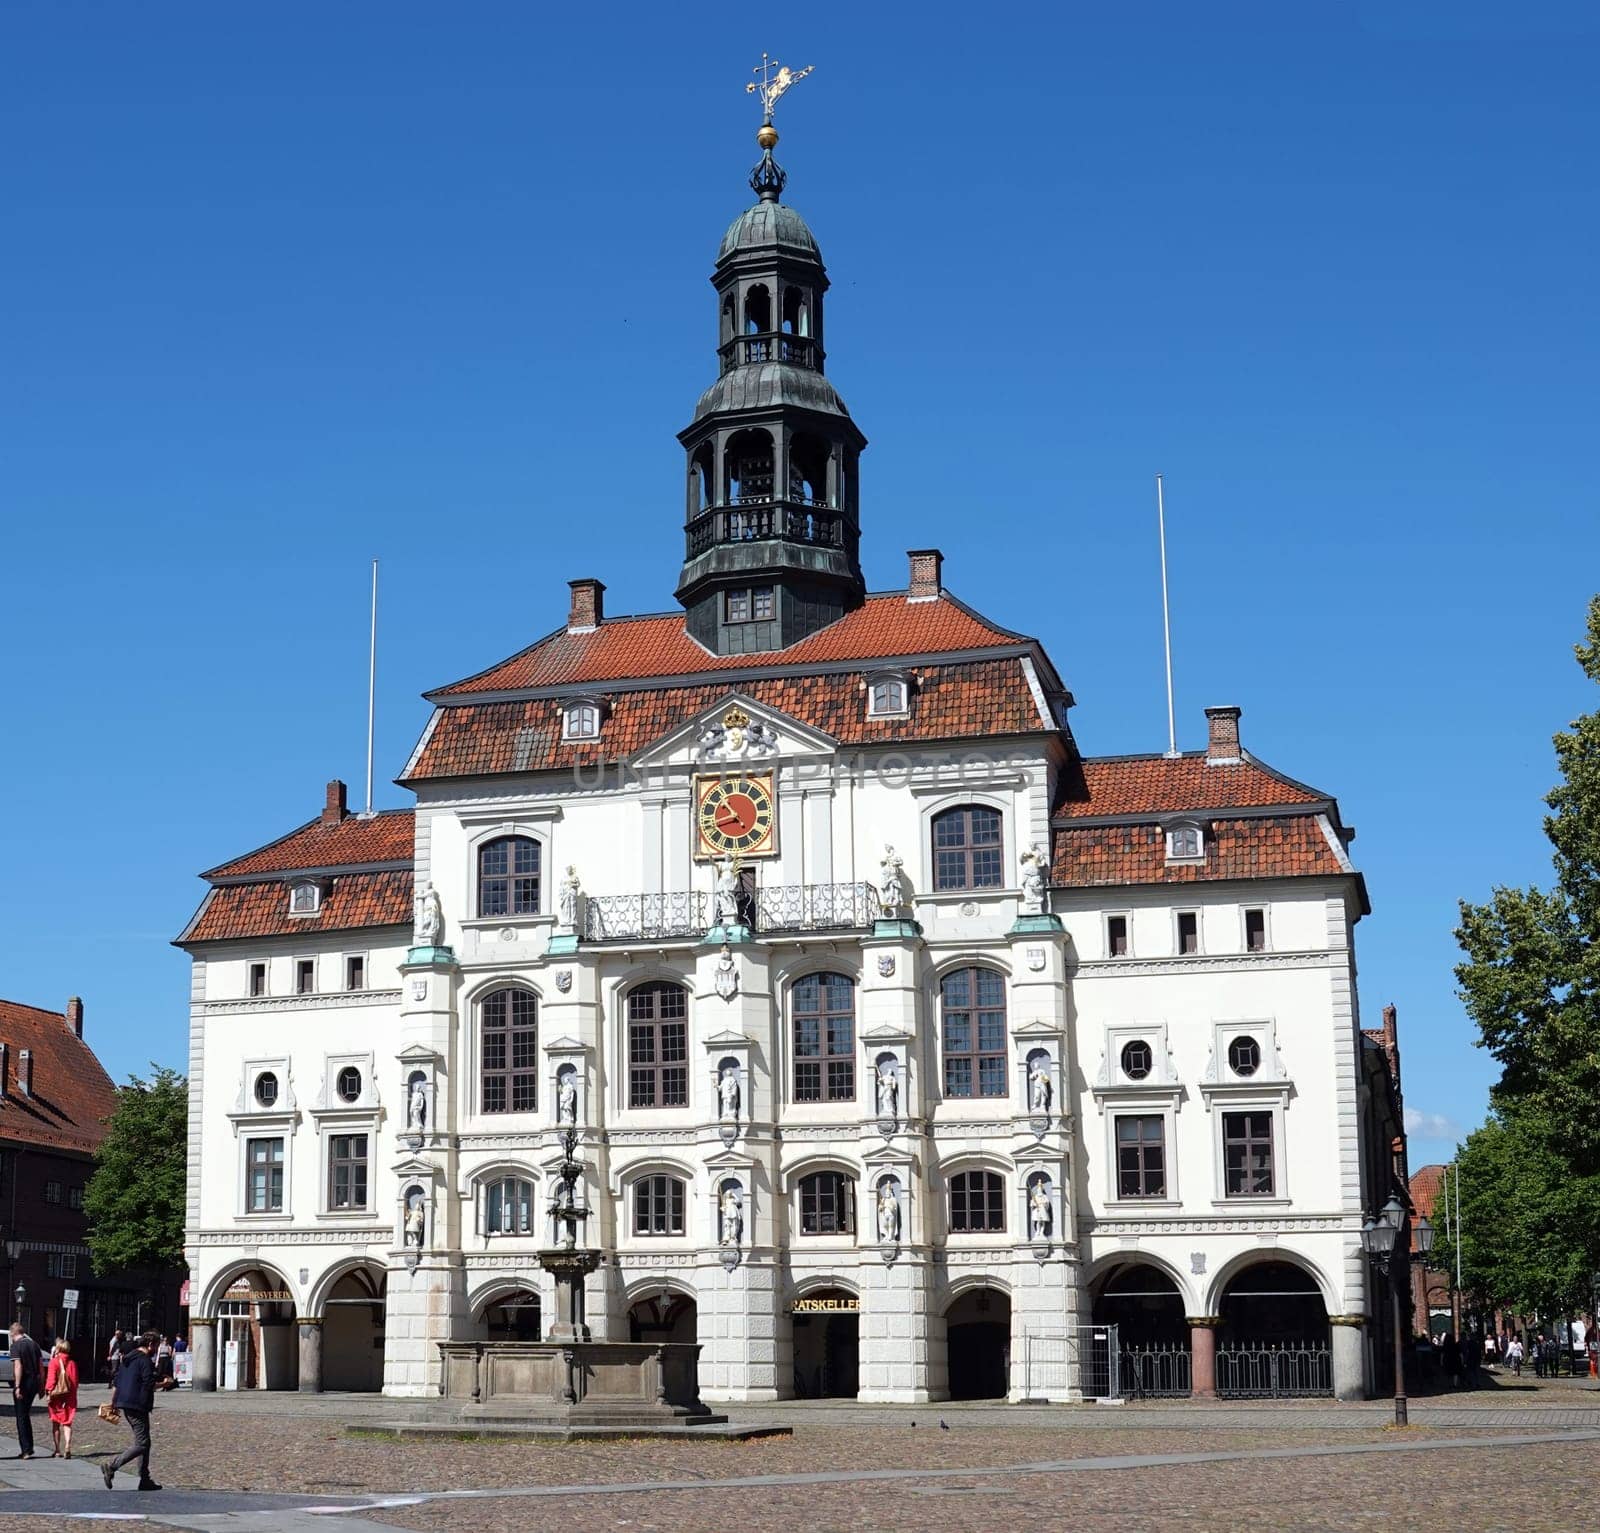 Lüneburg, Germany - July 7, 2023 The old townhall of Lueneburg (Lüneburg). The facade of this medieval building was completed in 1720